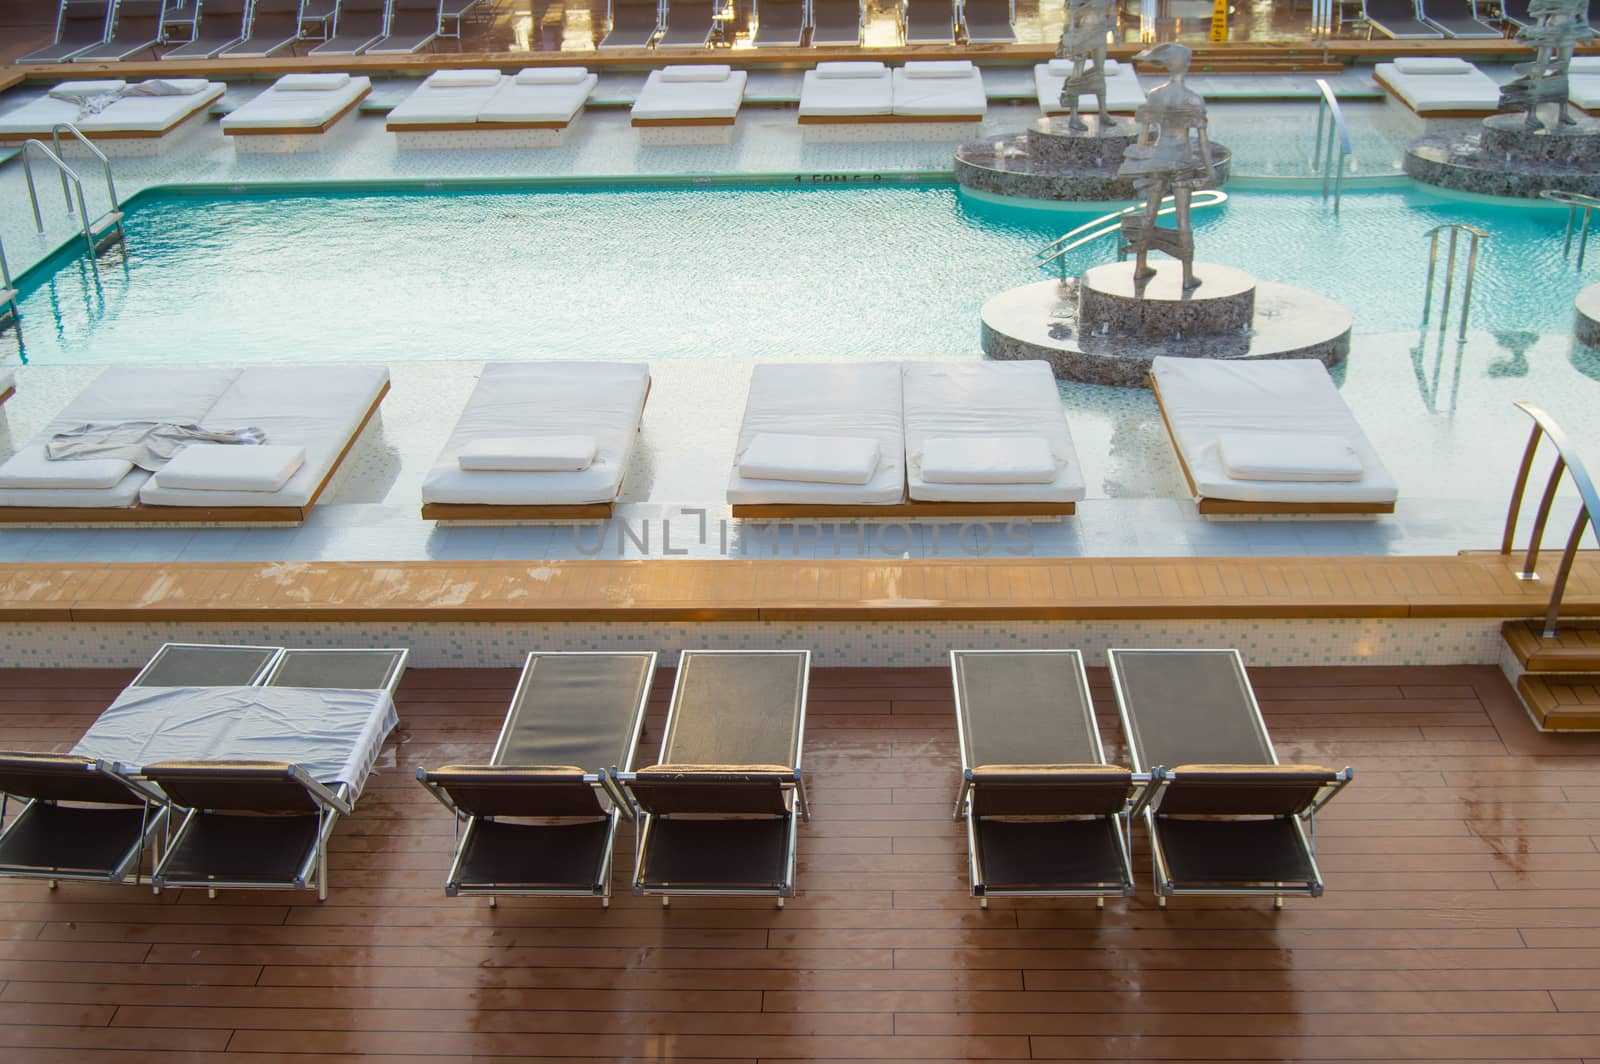 Top view of the luxurious pool with empty sun beds on the open deck of a modern cruise liner.